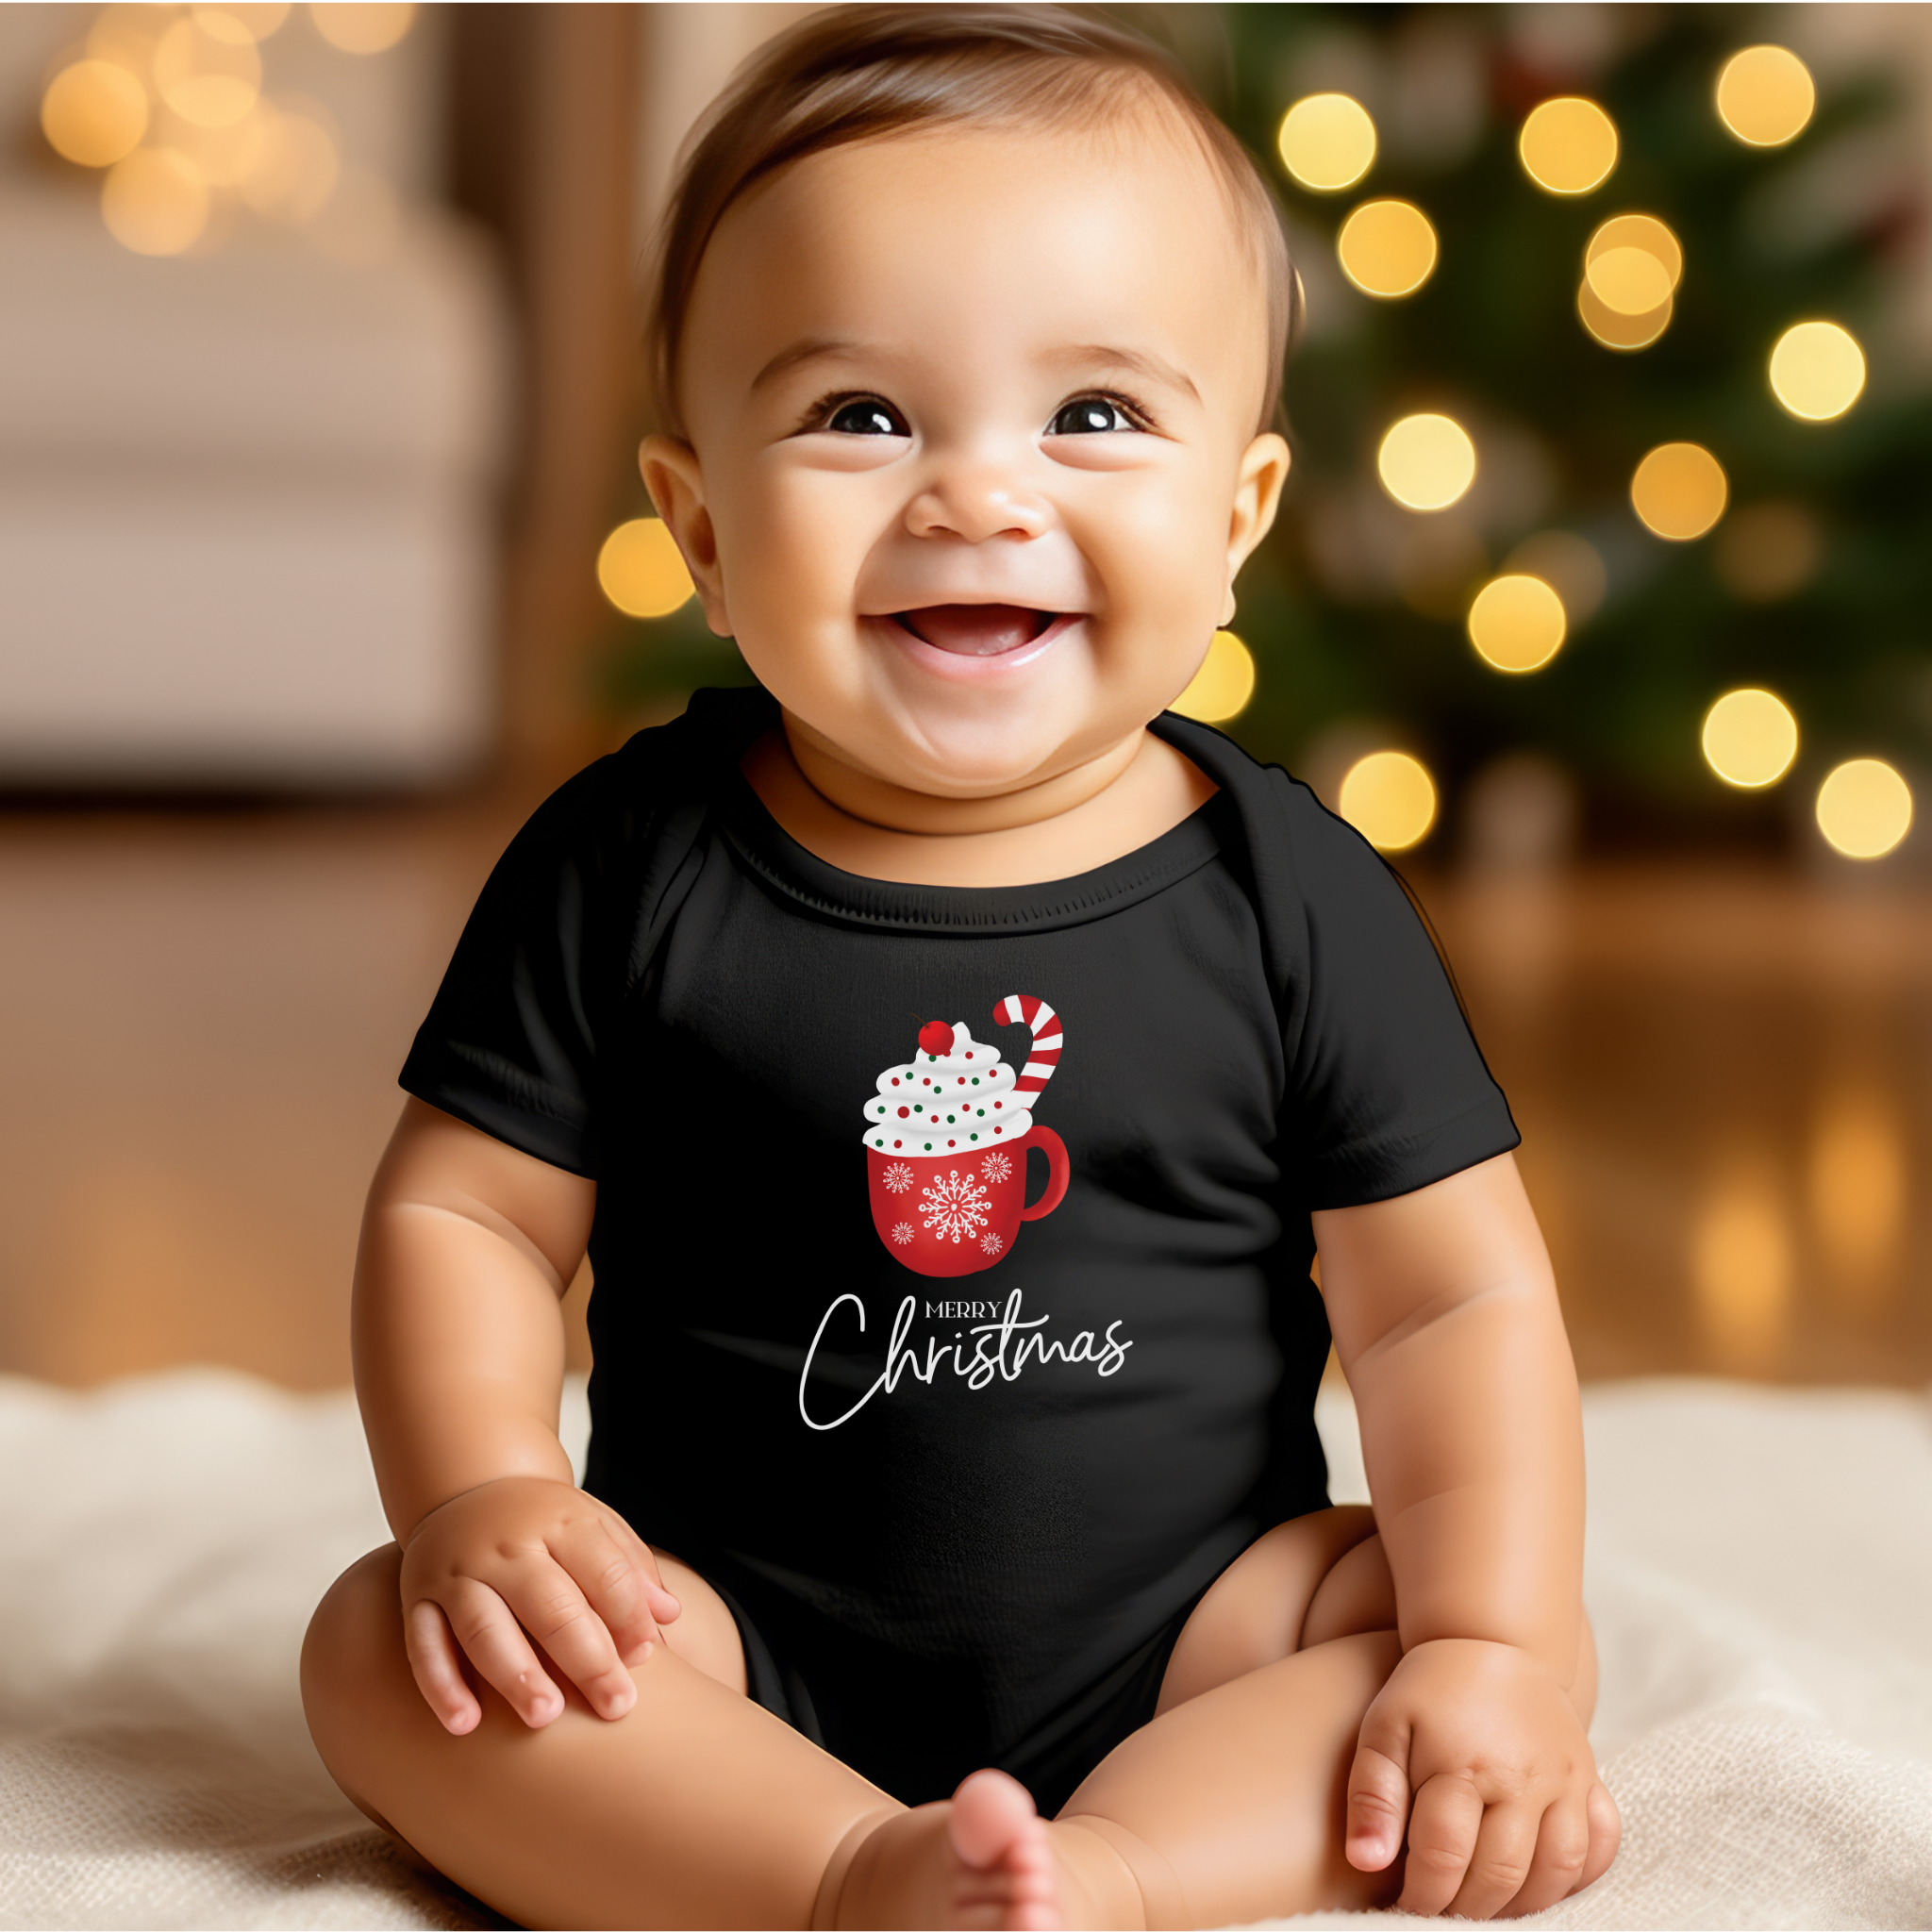 Merry Christmas Baby Onesie, Baby Clothes, end of the year